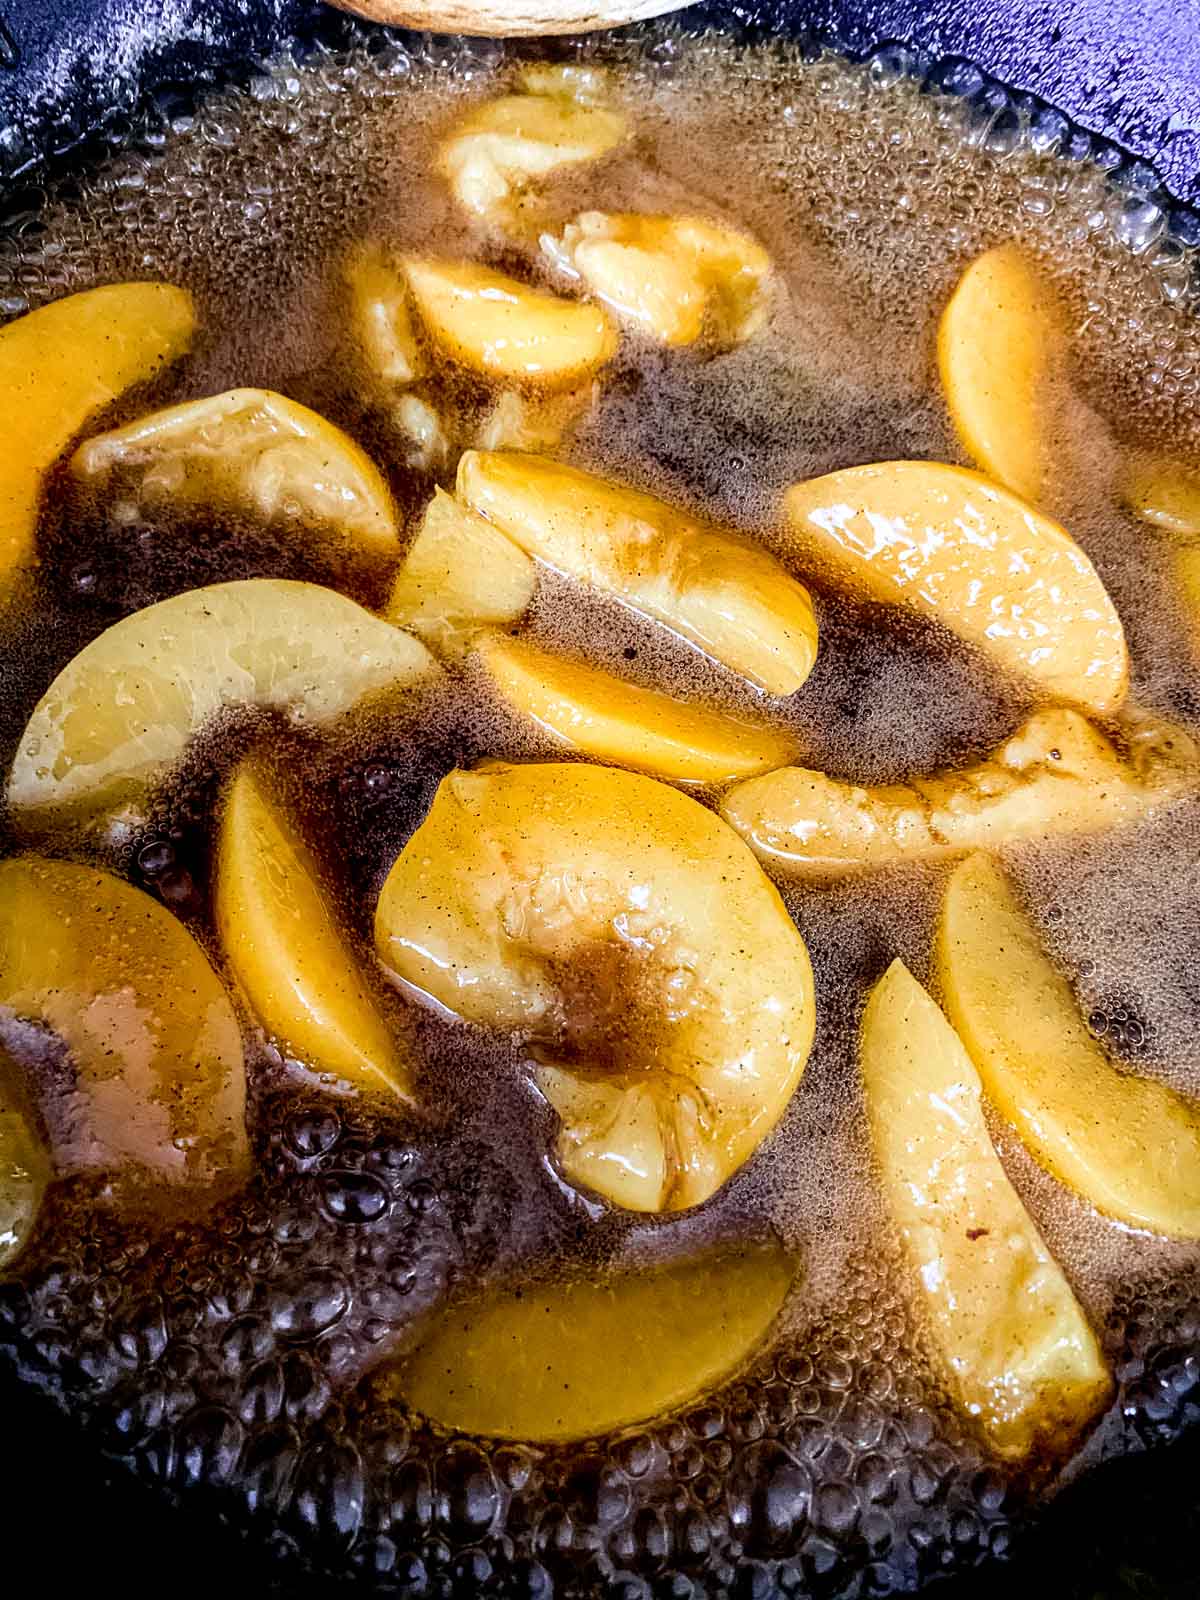 Peaches simmering in the syrup in the skillet.